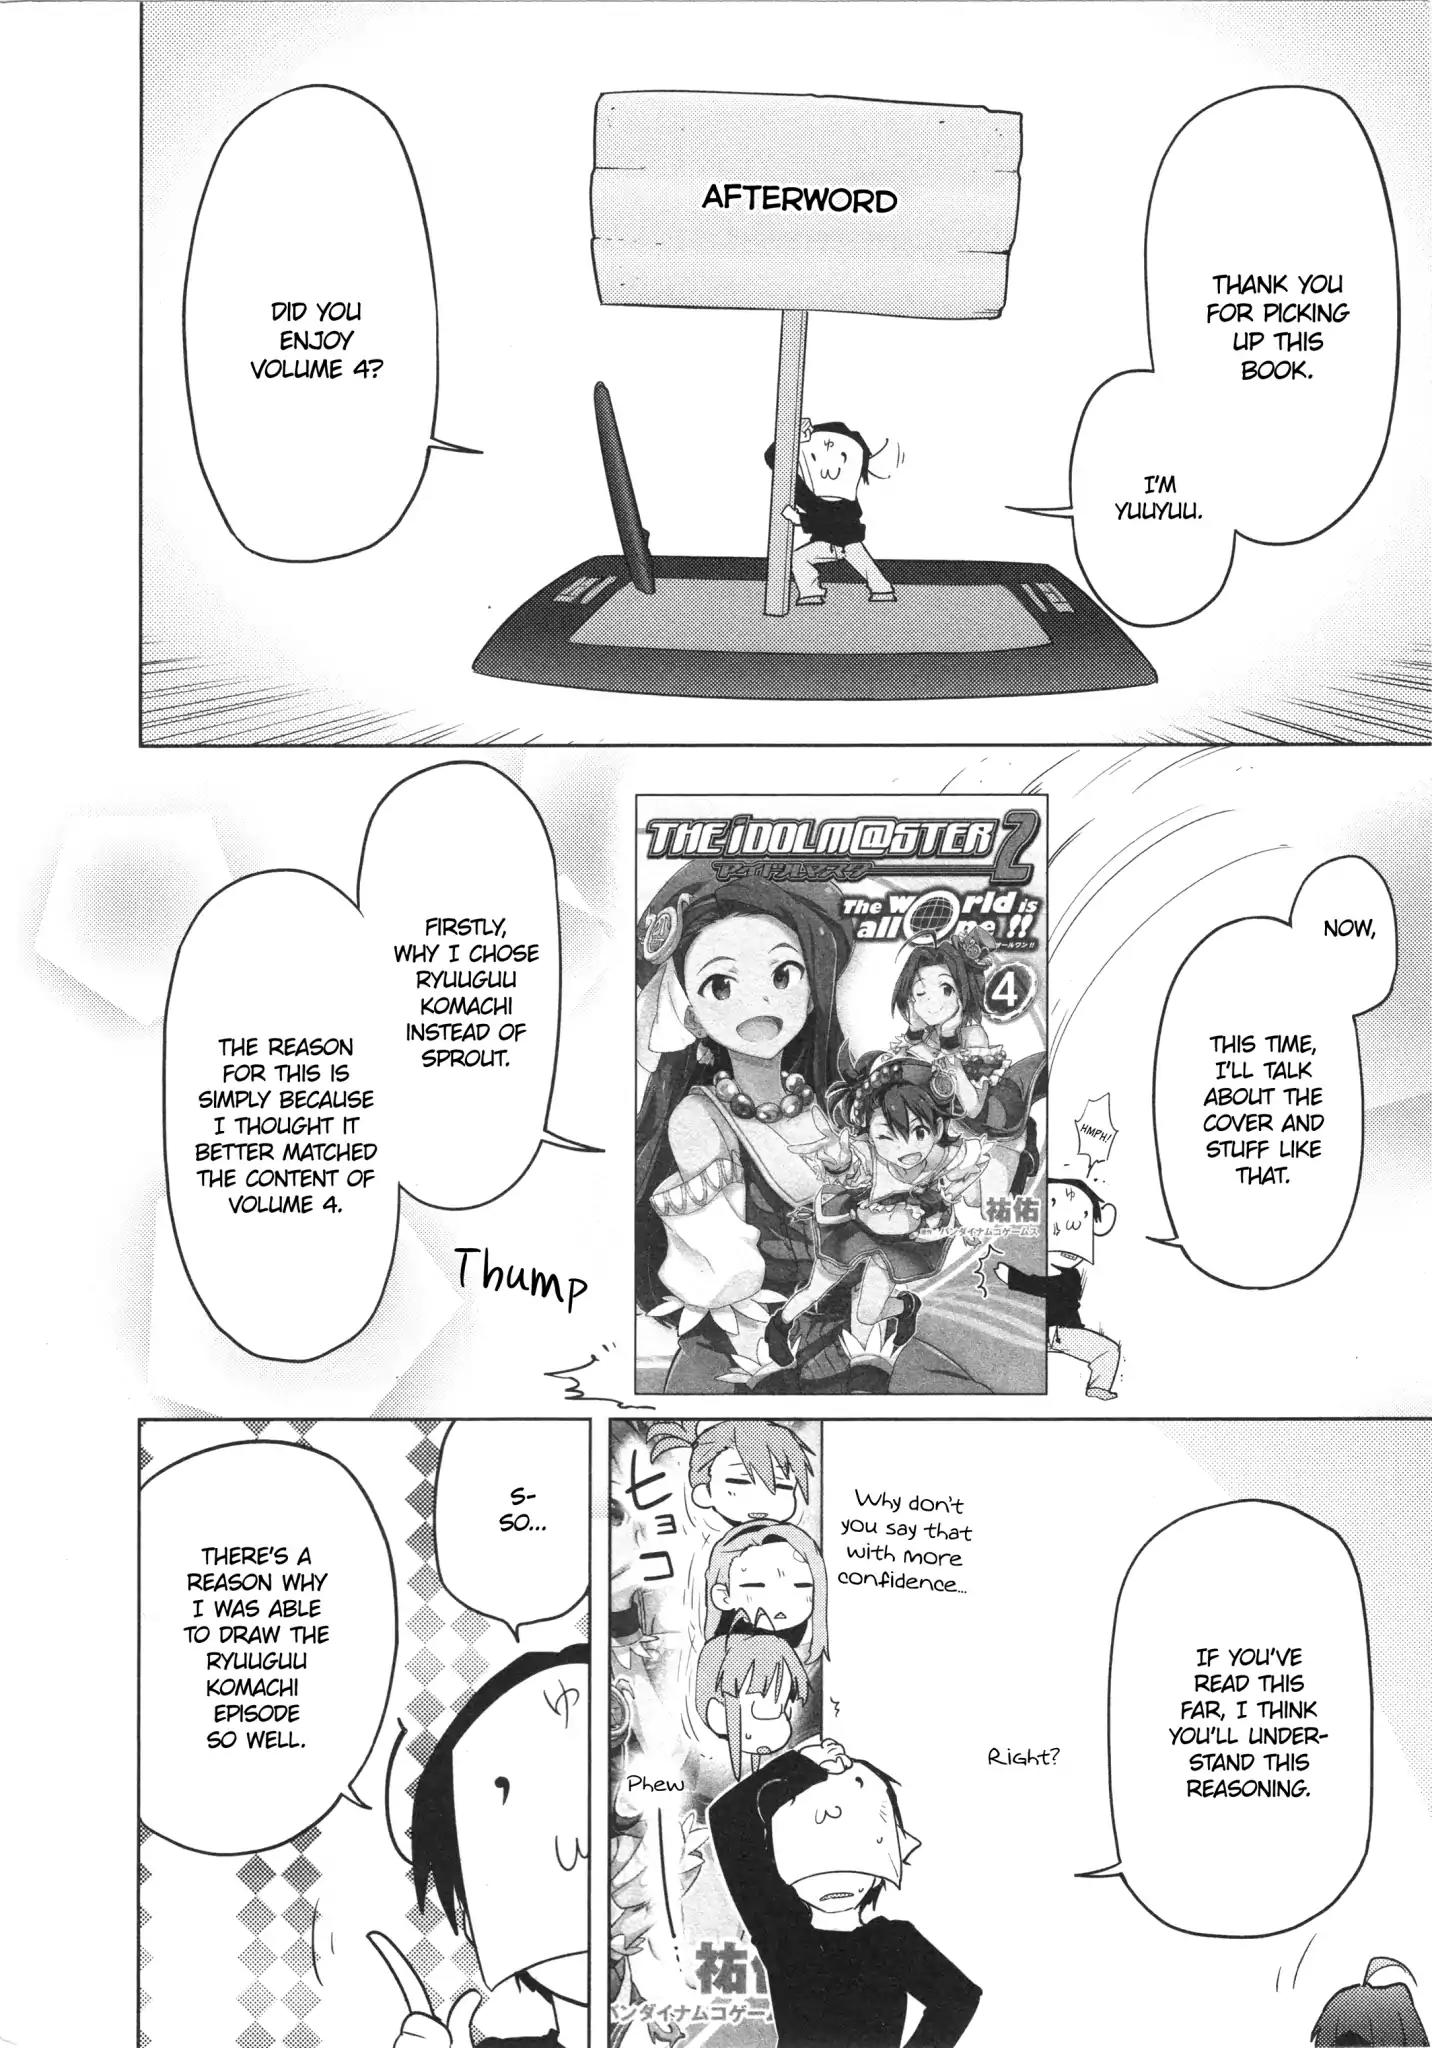 The iDOLM@STER 2: The World Is All One!! Vol.4 Chapter 28.1: Omake